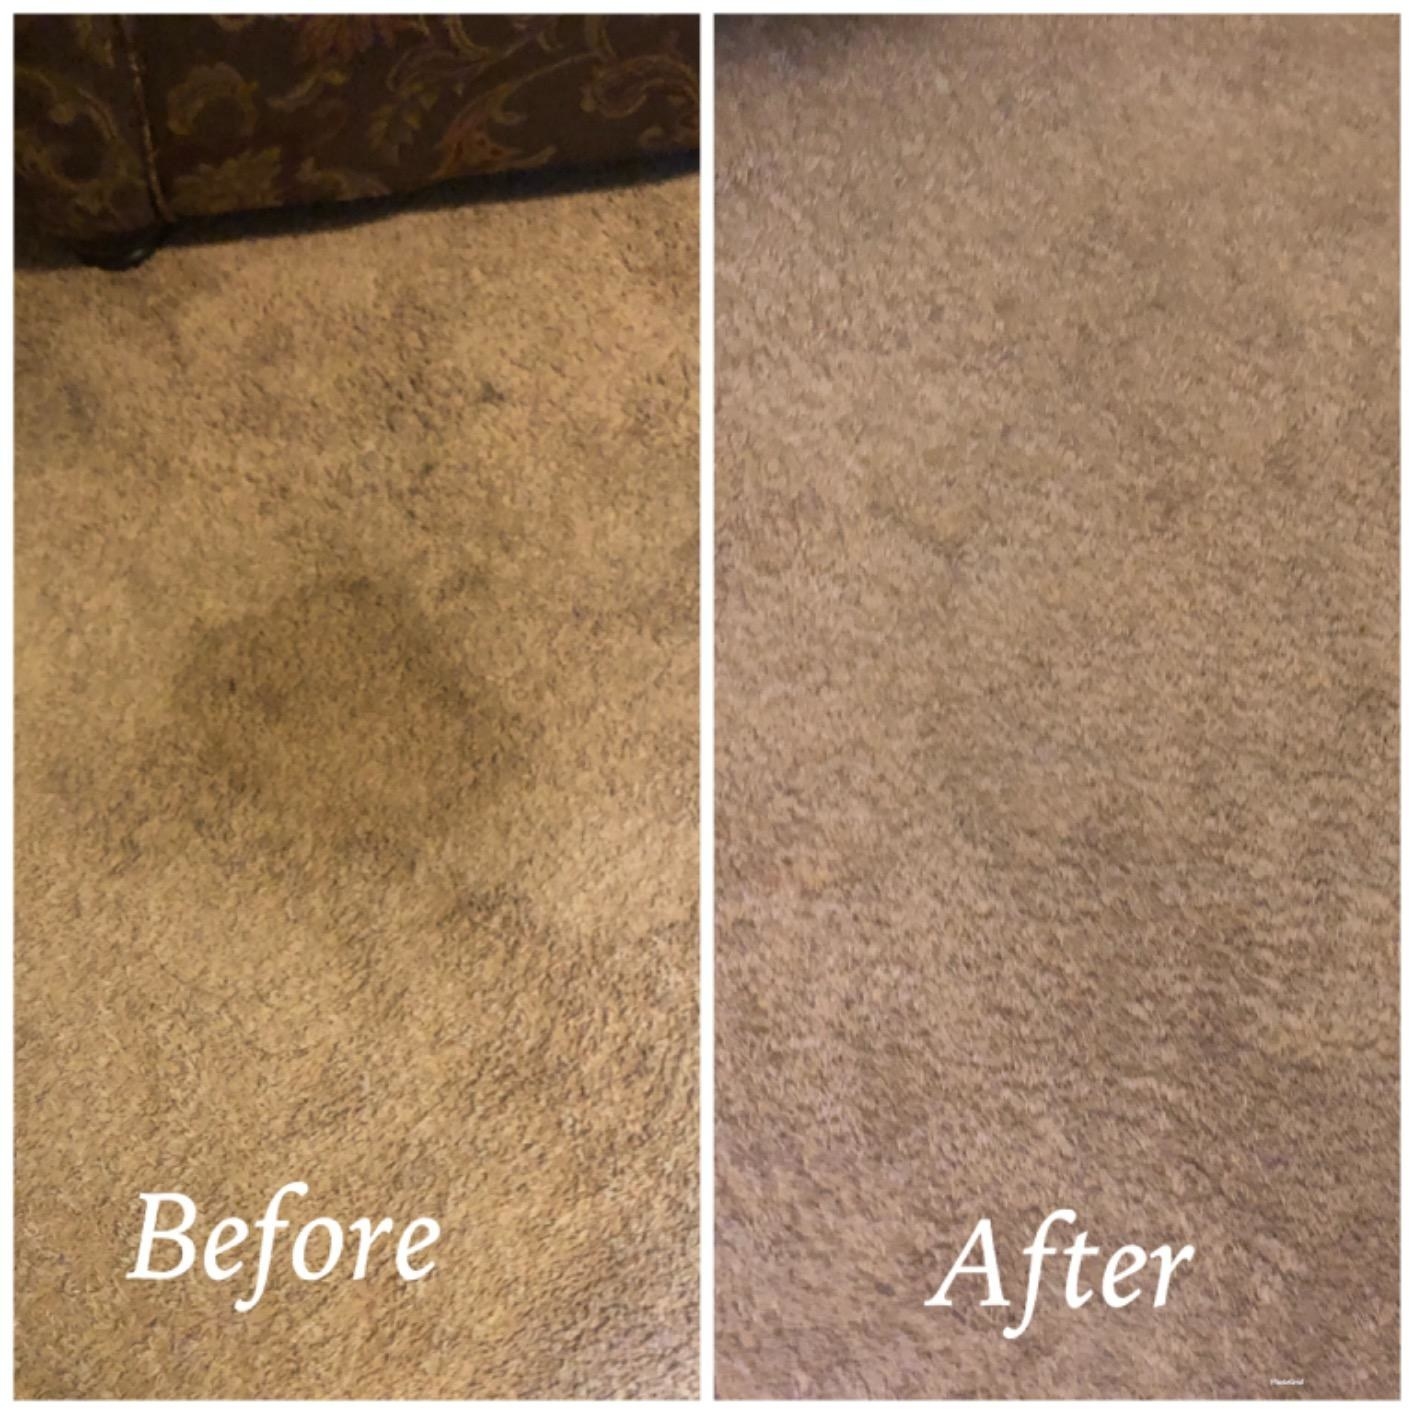 Reviewer&#x27;s results of using Folex carpet cleaner